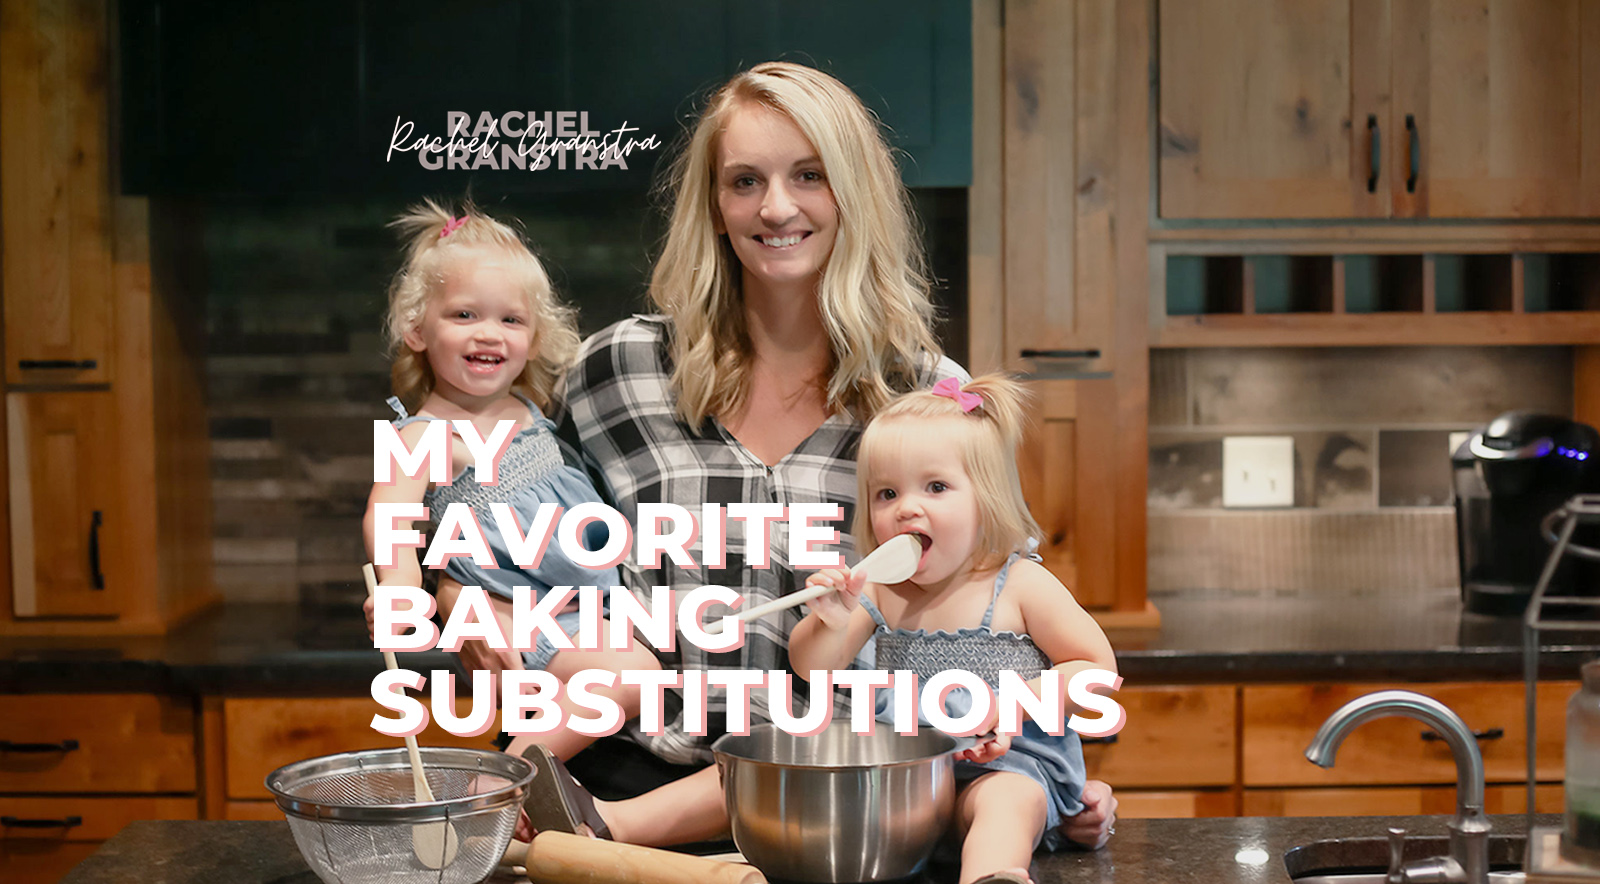 My Favorite Baking Substitutions